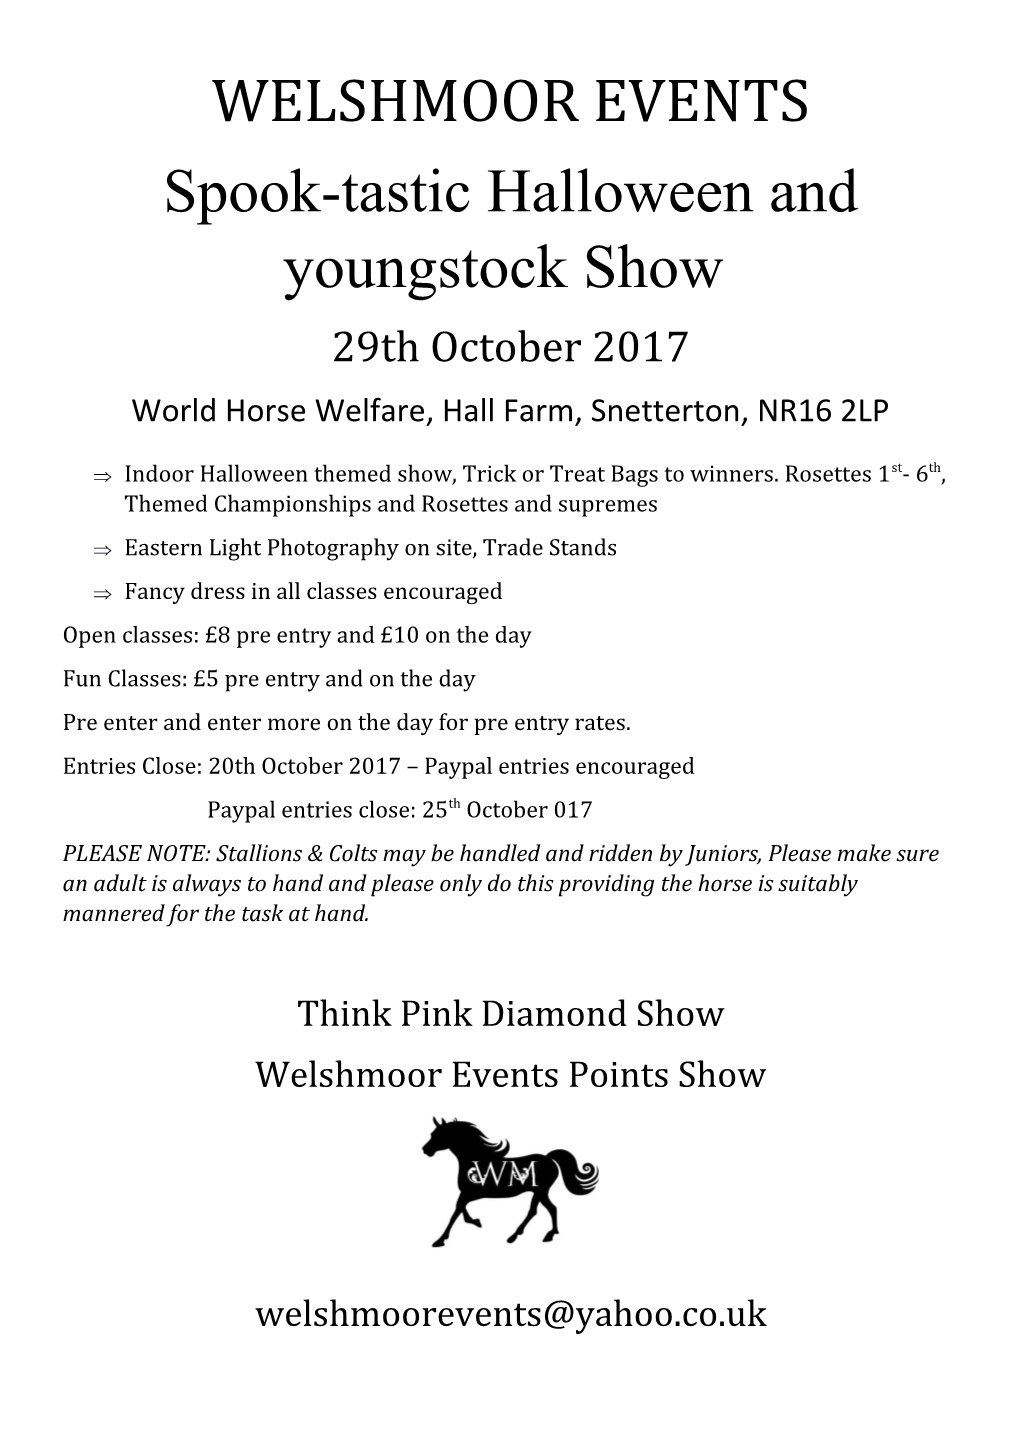 Spook-Tastic Halloween and Youngstock Show